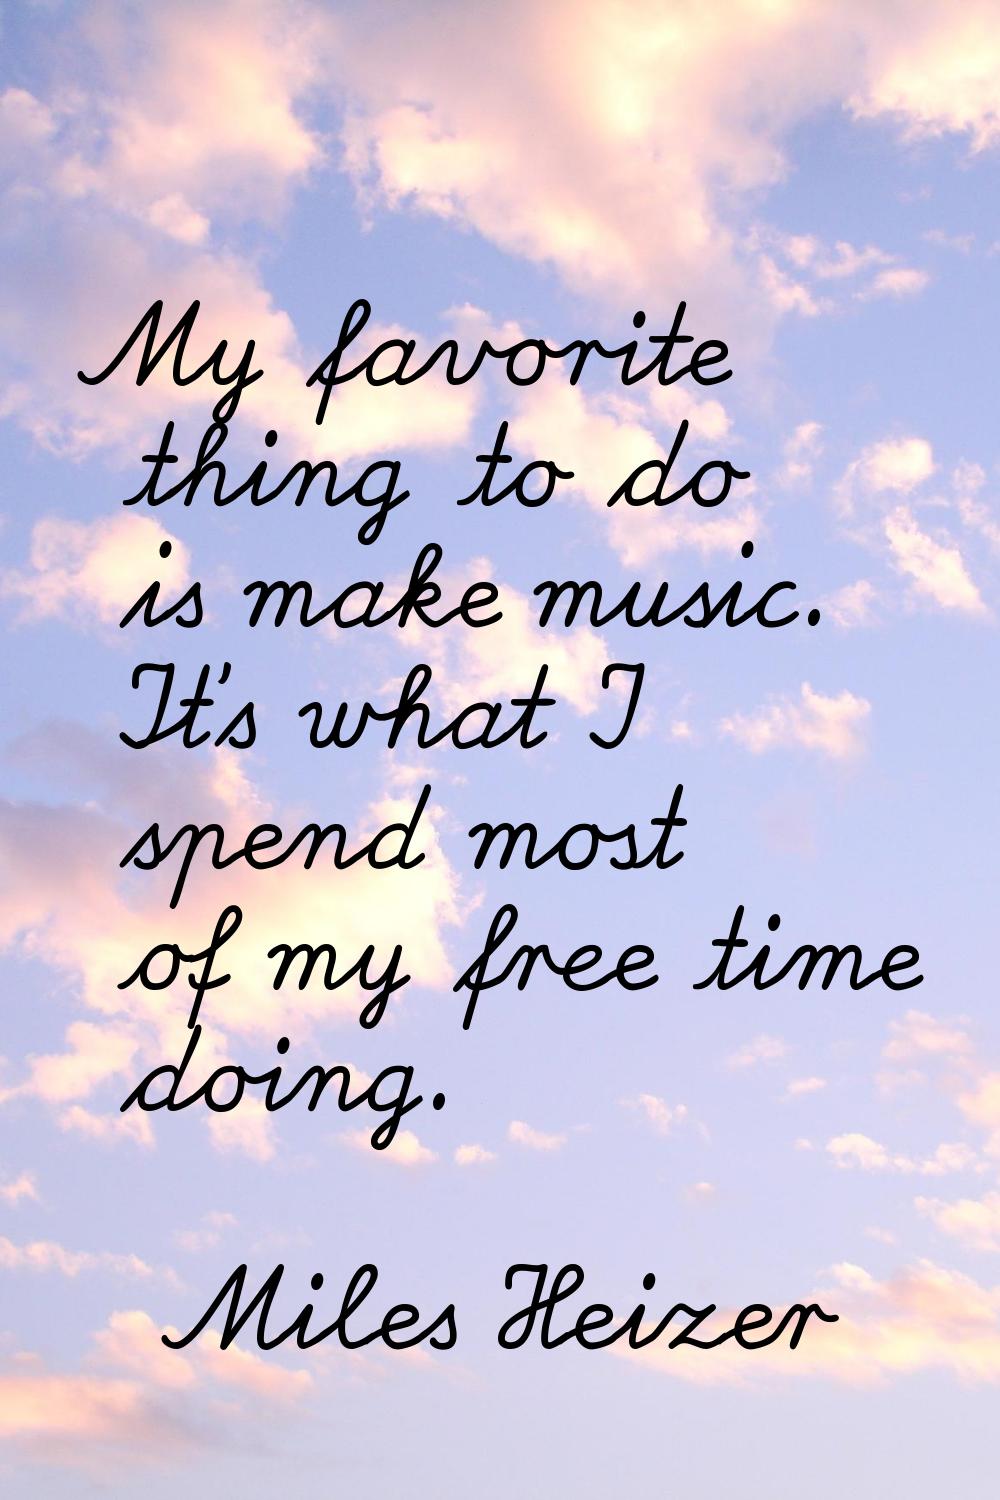 My favorite thing to do is make music. It's what I spend most of my free time doing.